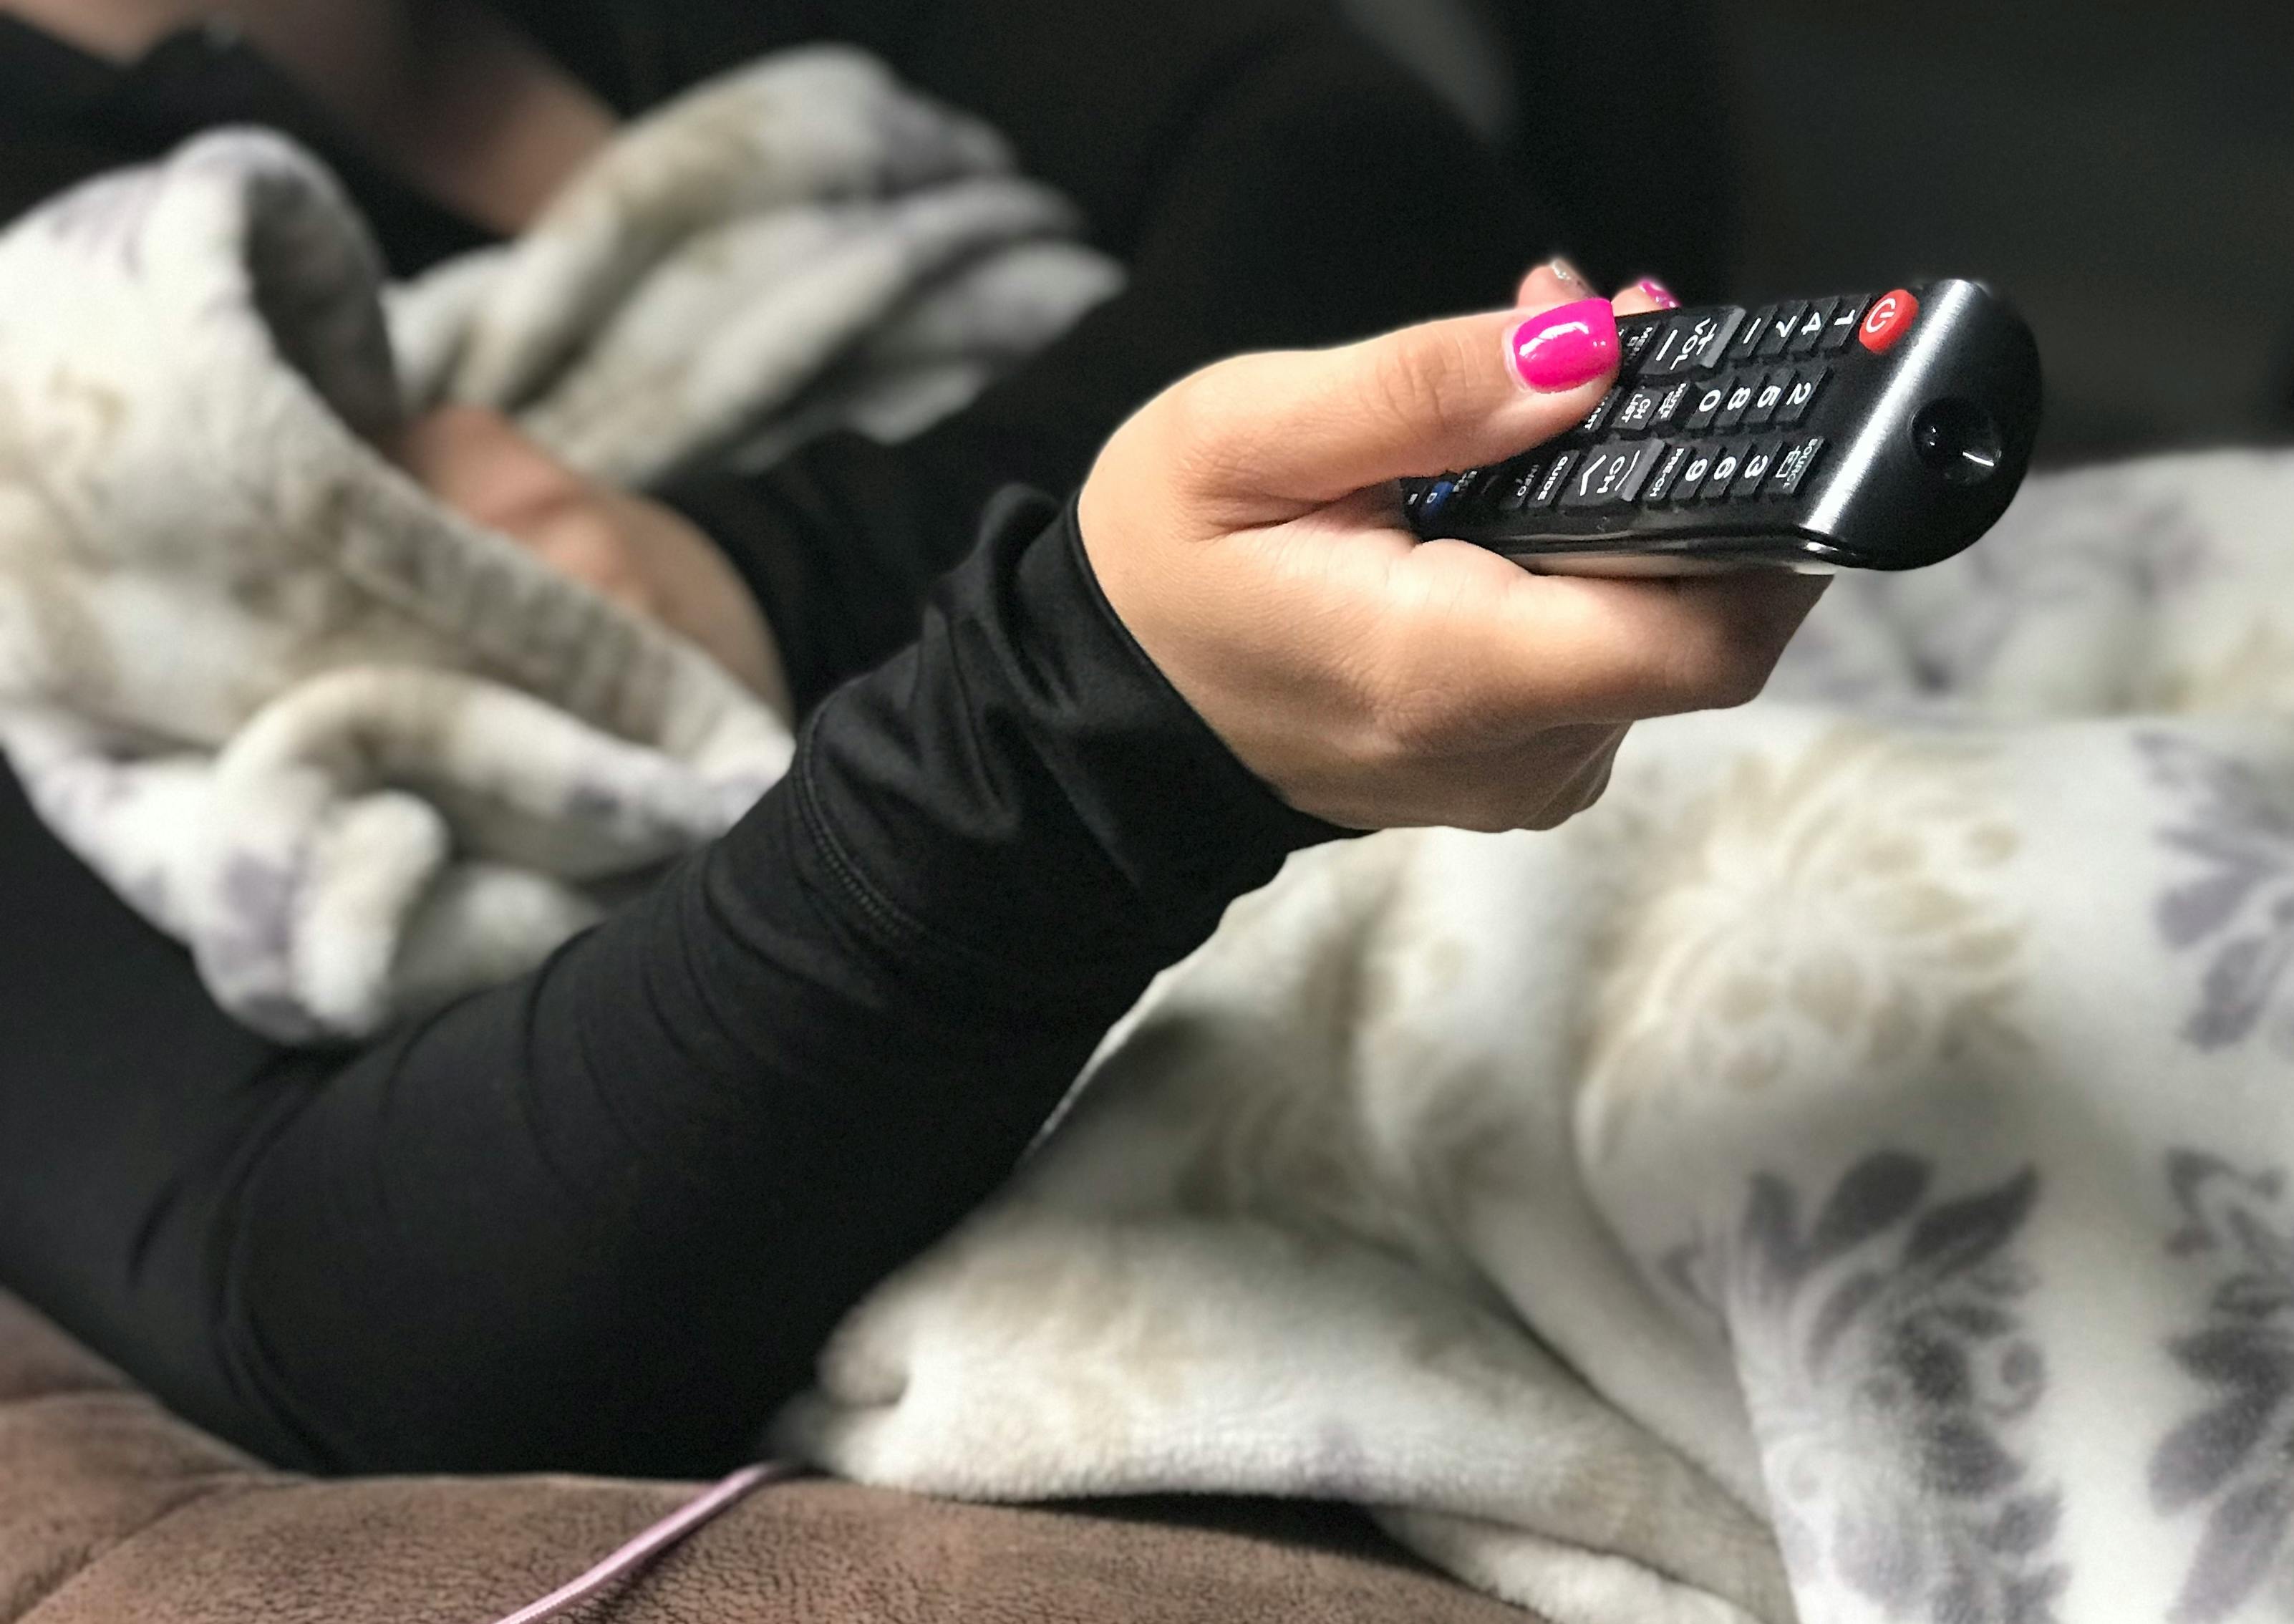 person sitting on couch with blanket holding remote